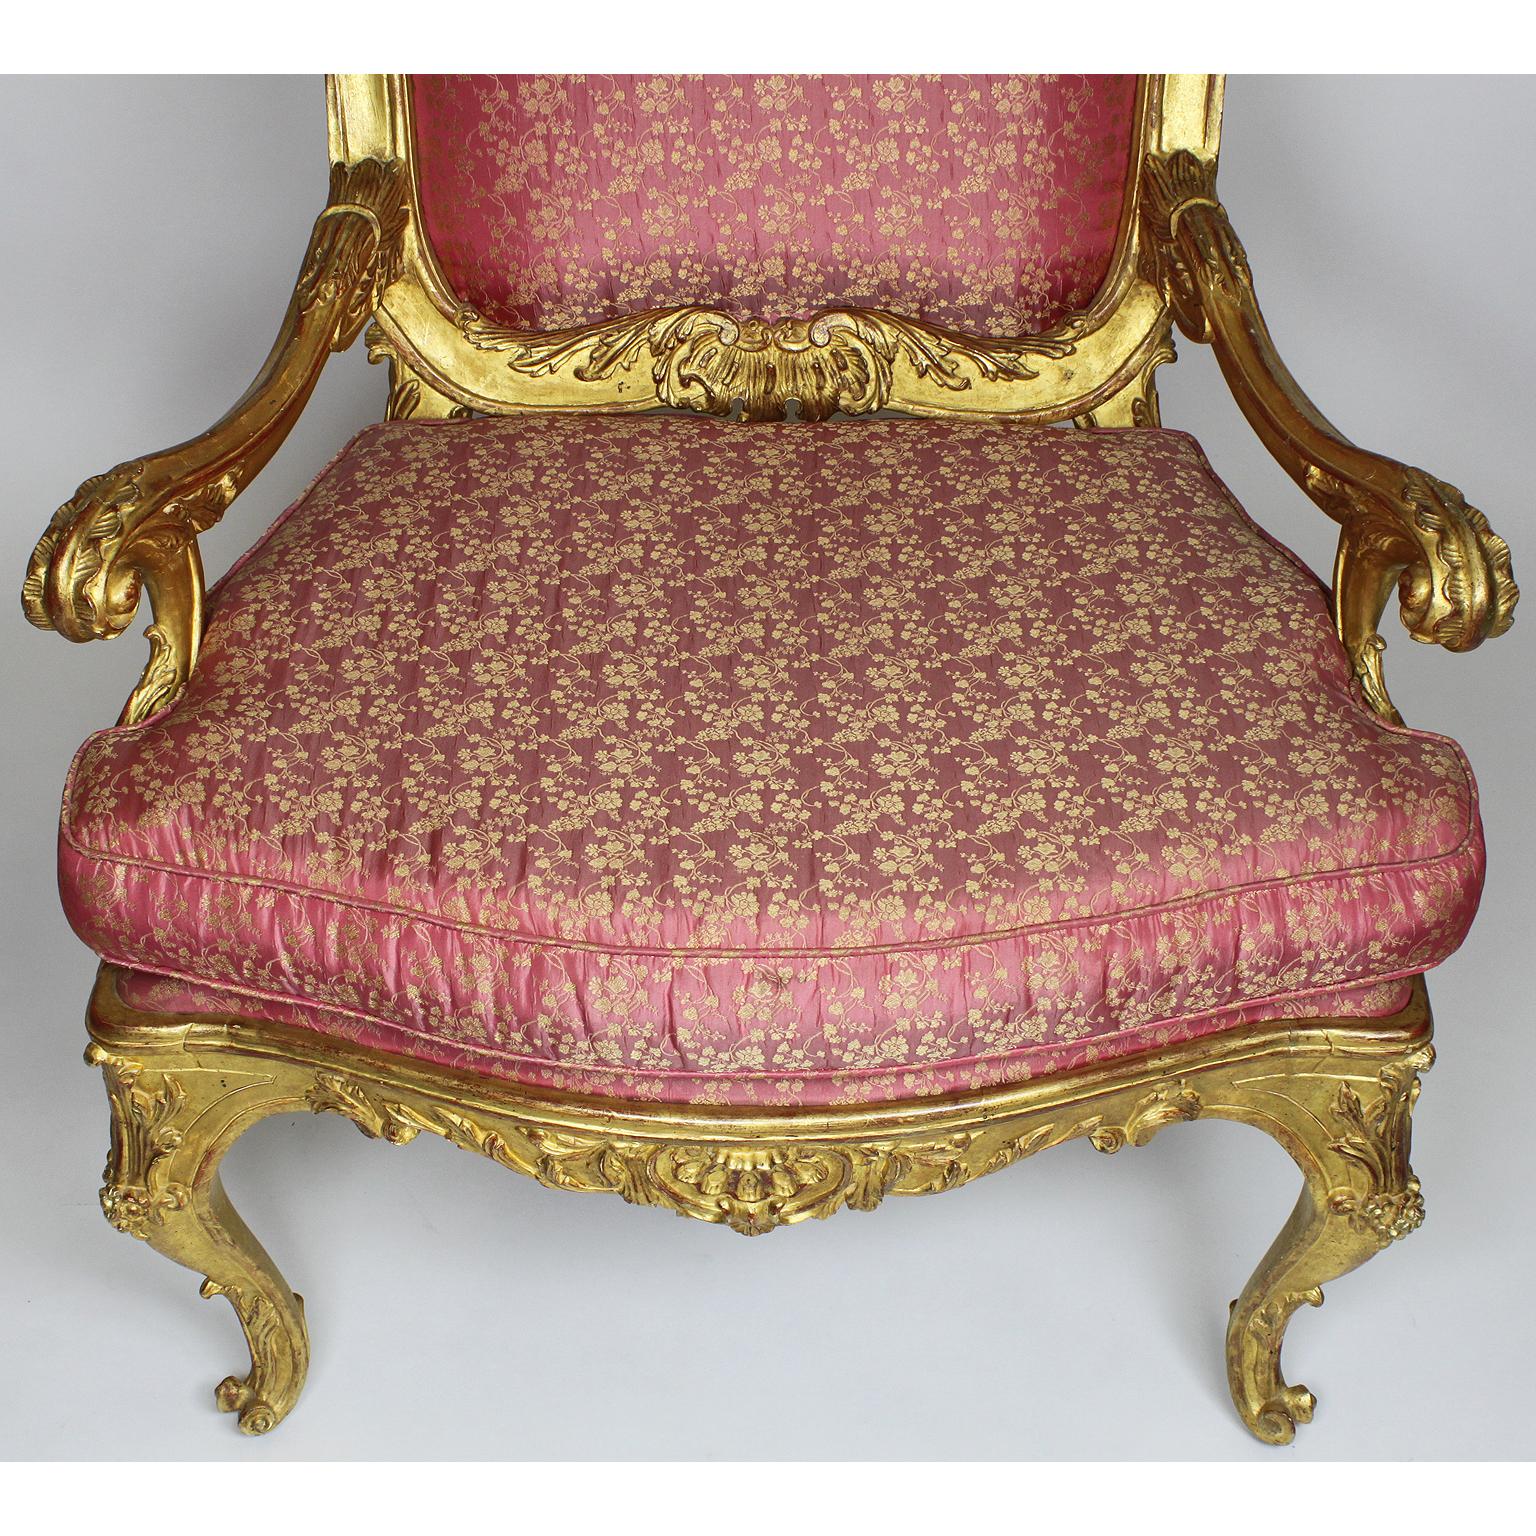 Pair of Italian Venetian Rococo Revival Style Giltwood Carved Throne Armchairs For Sale 3